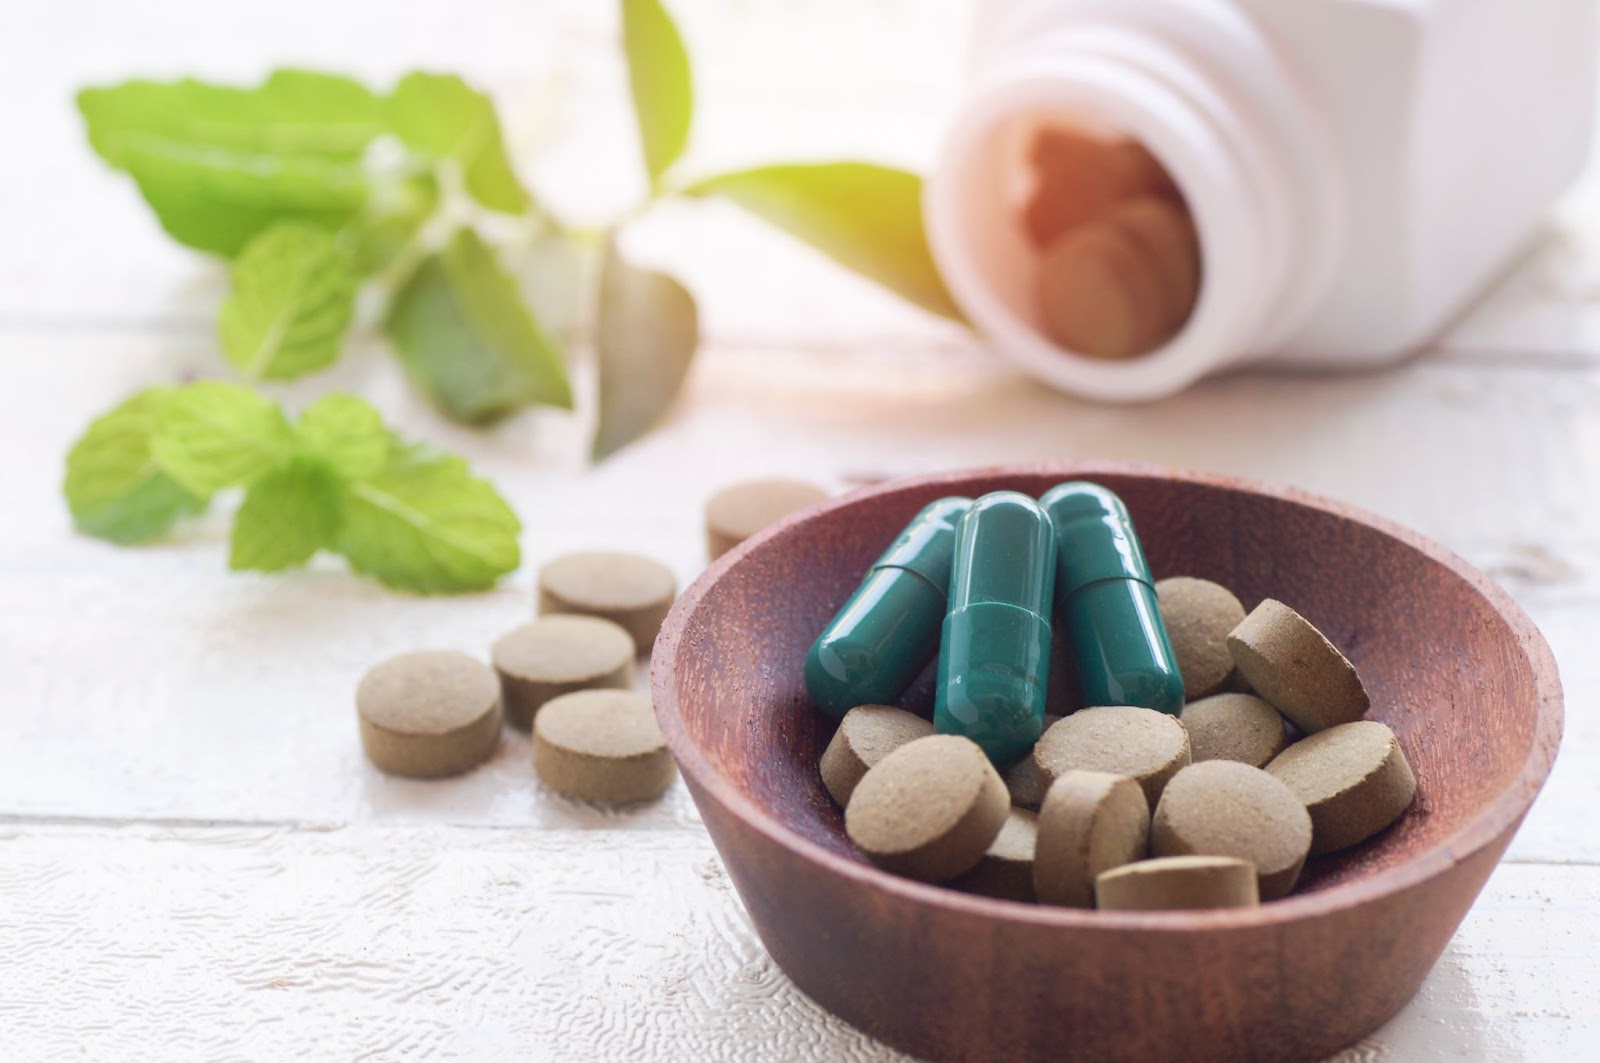 How Are Supplements Regulated?